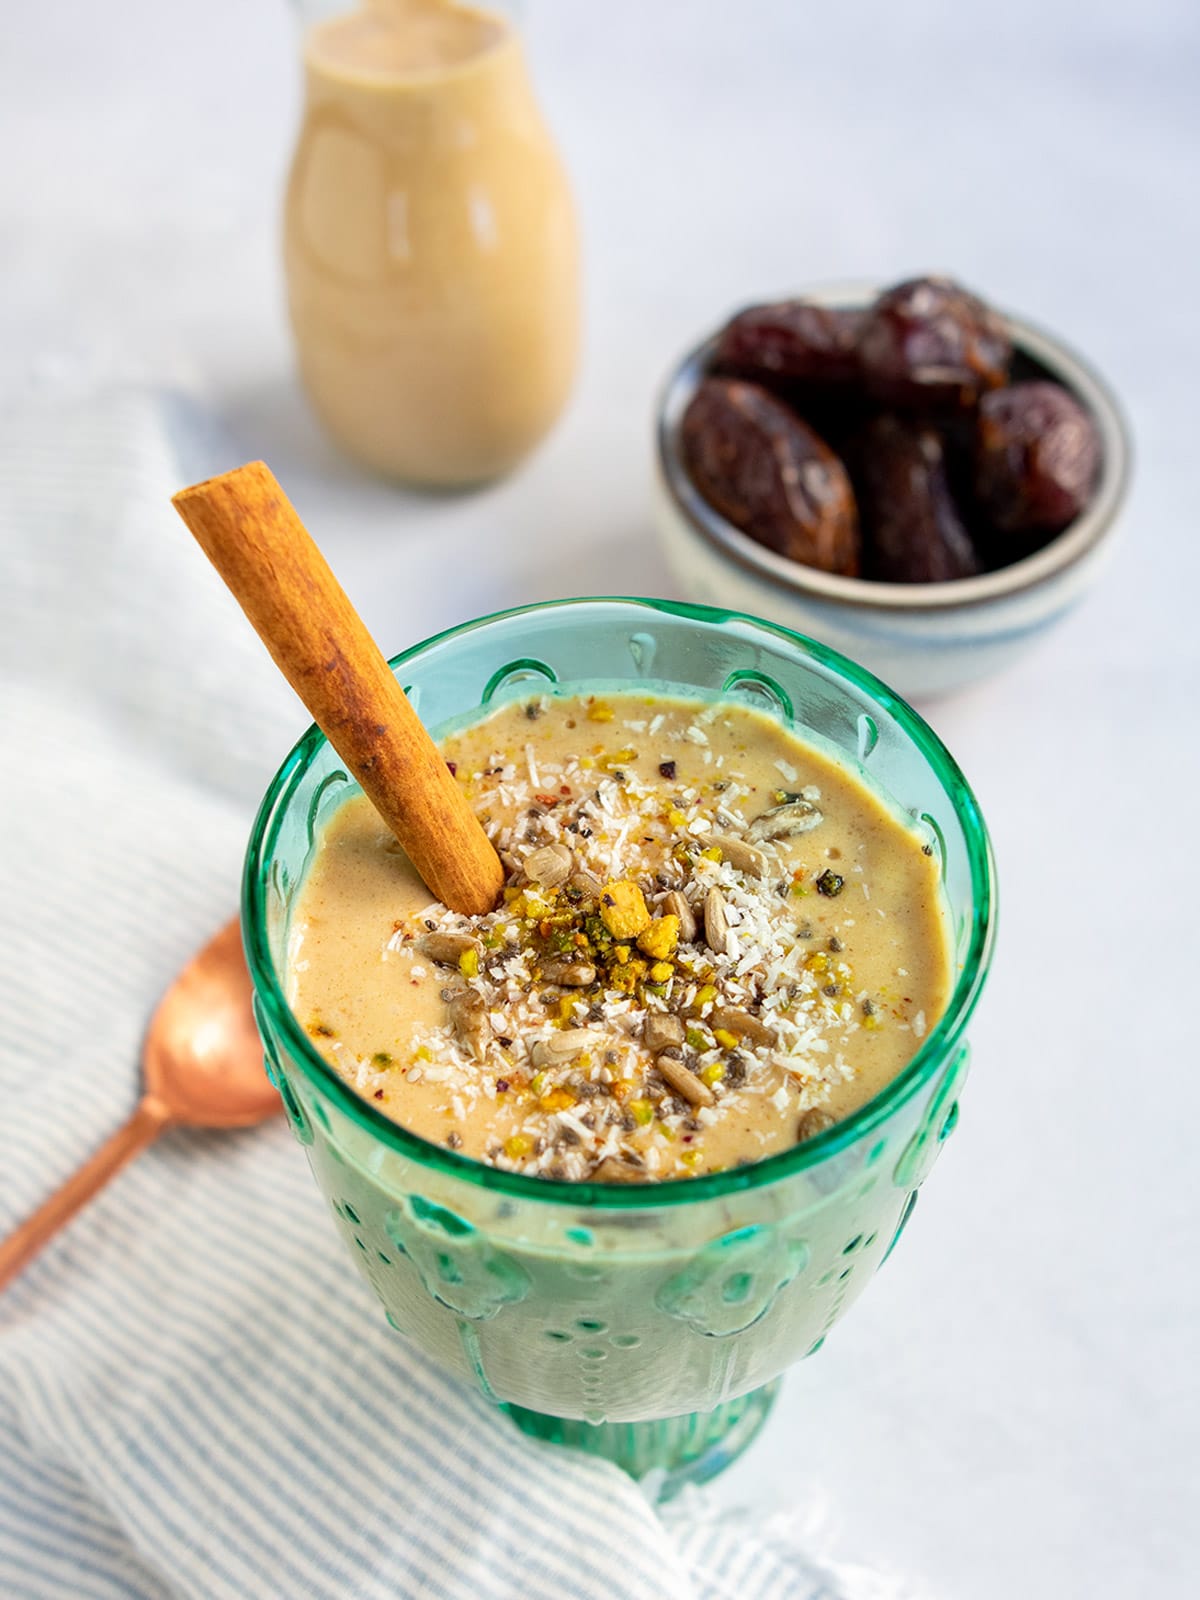 Date smoothie in a green glass with cinnamon stick.